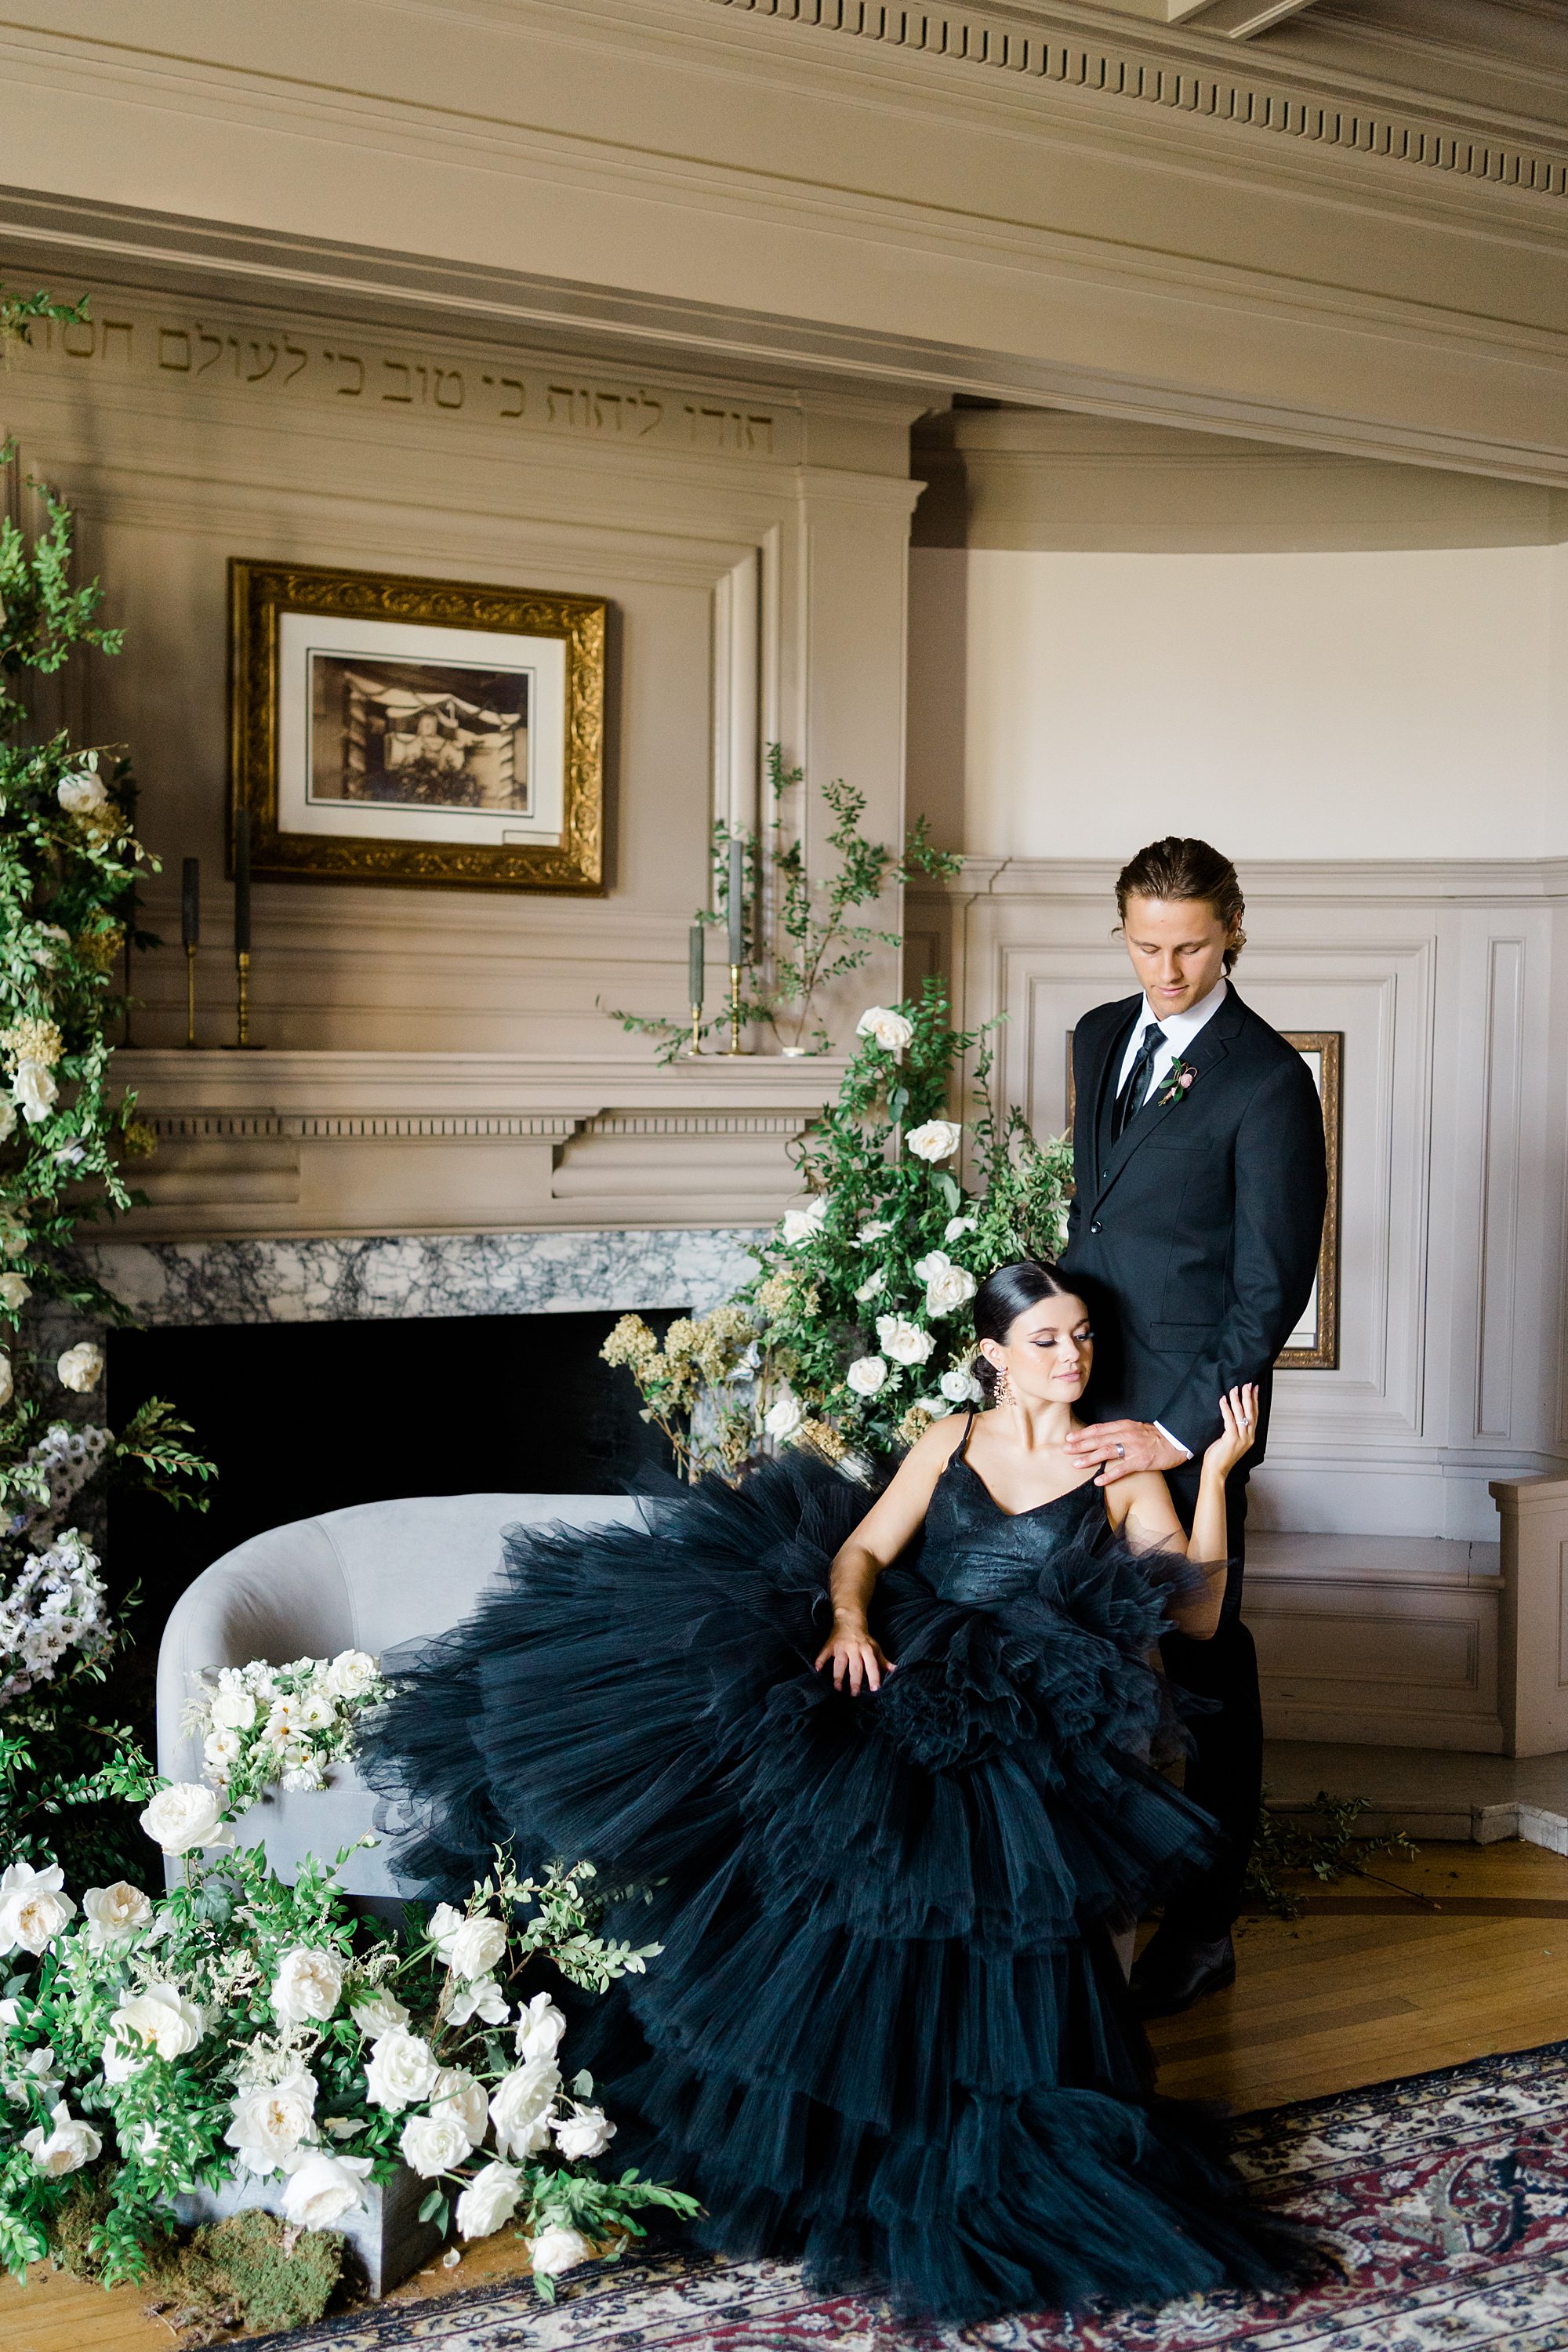 bride and groom portrait inspiration from High Fashion Black Wedding Dress Styled Shoot at Cairnwood Estate